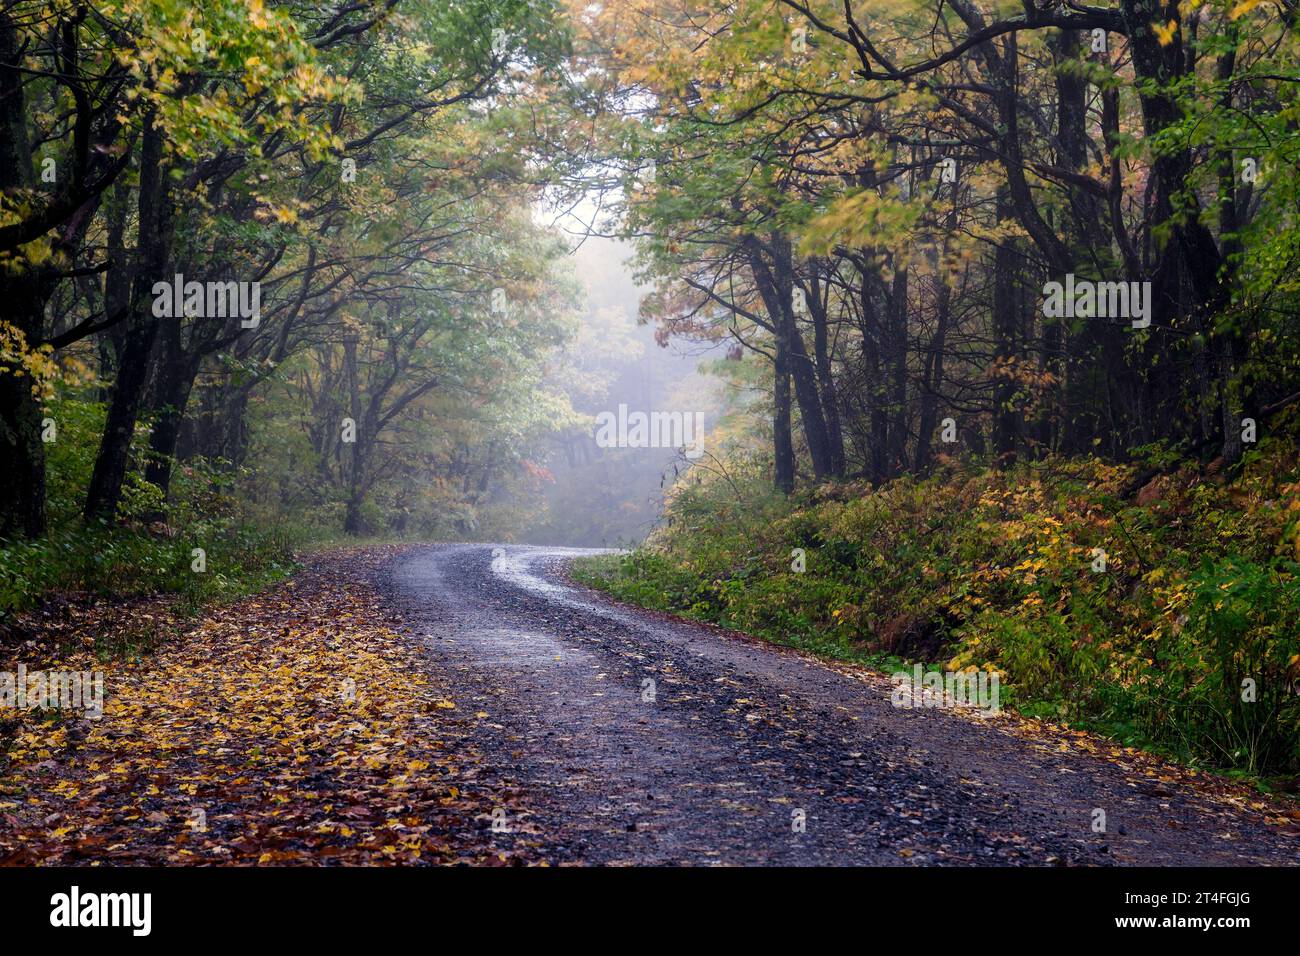 a narrow country road winds through a foggy forest with autumn colors creates an enchanted scene. Stock Photo